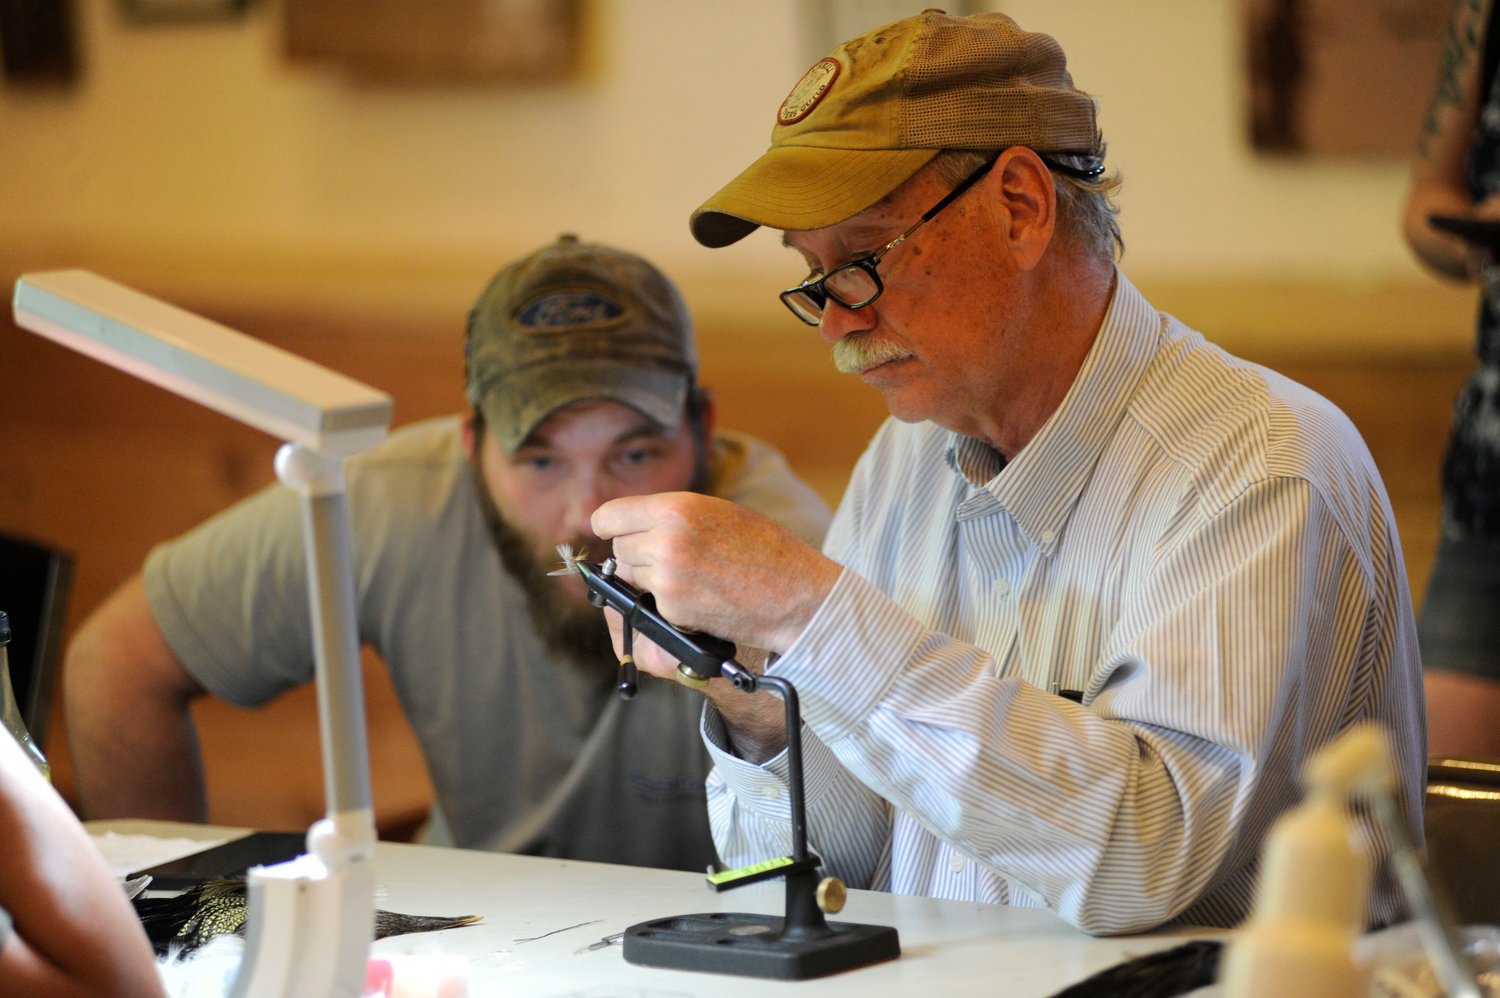 Hands-on teaching. Joseph Ceballos, president of the Catskills Fly Tyers Guild, shows a young tyer a few tricks of the art...